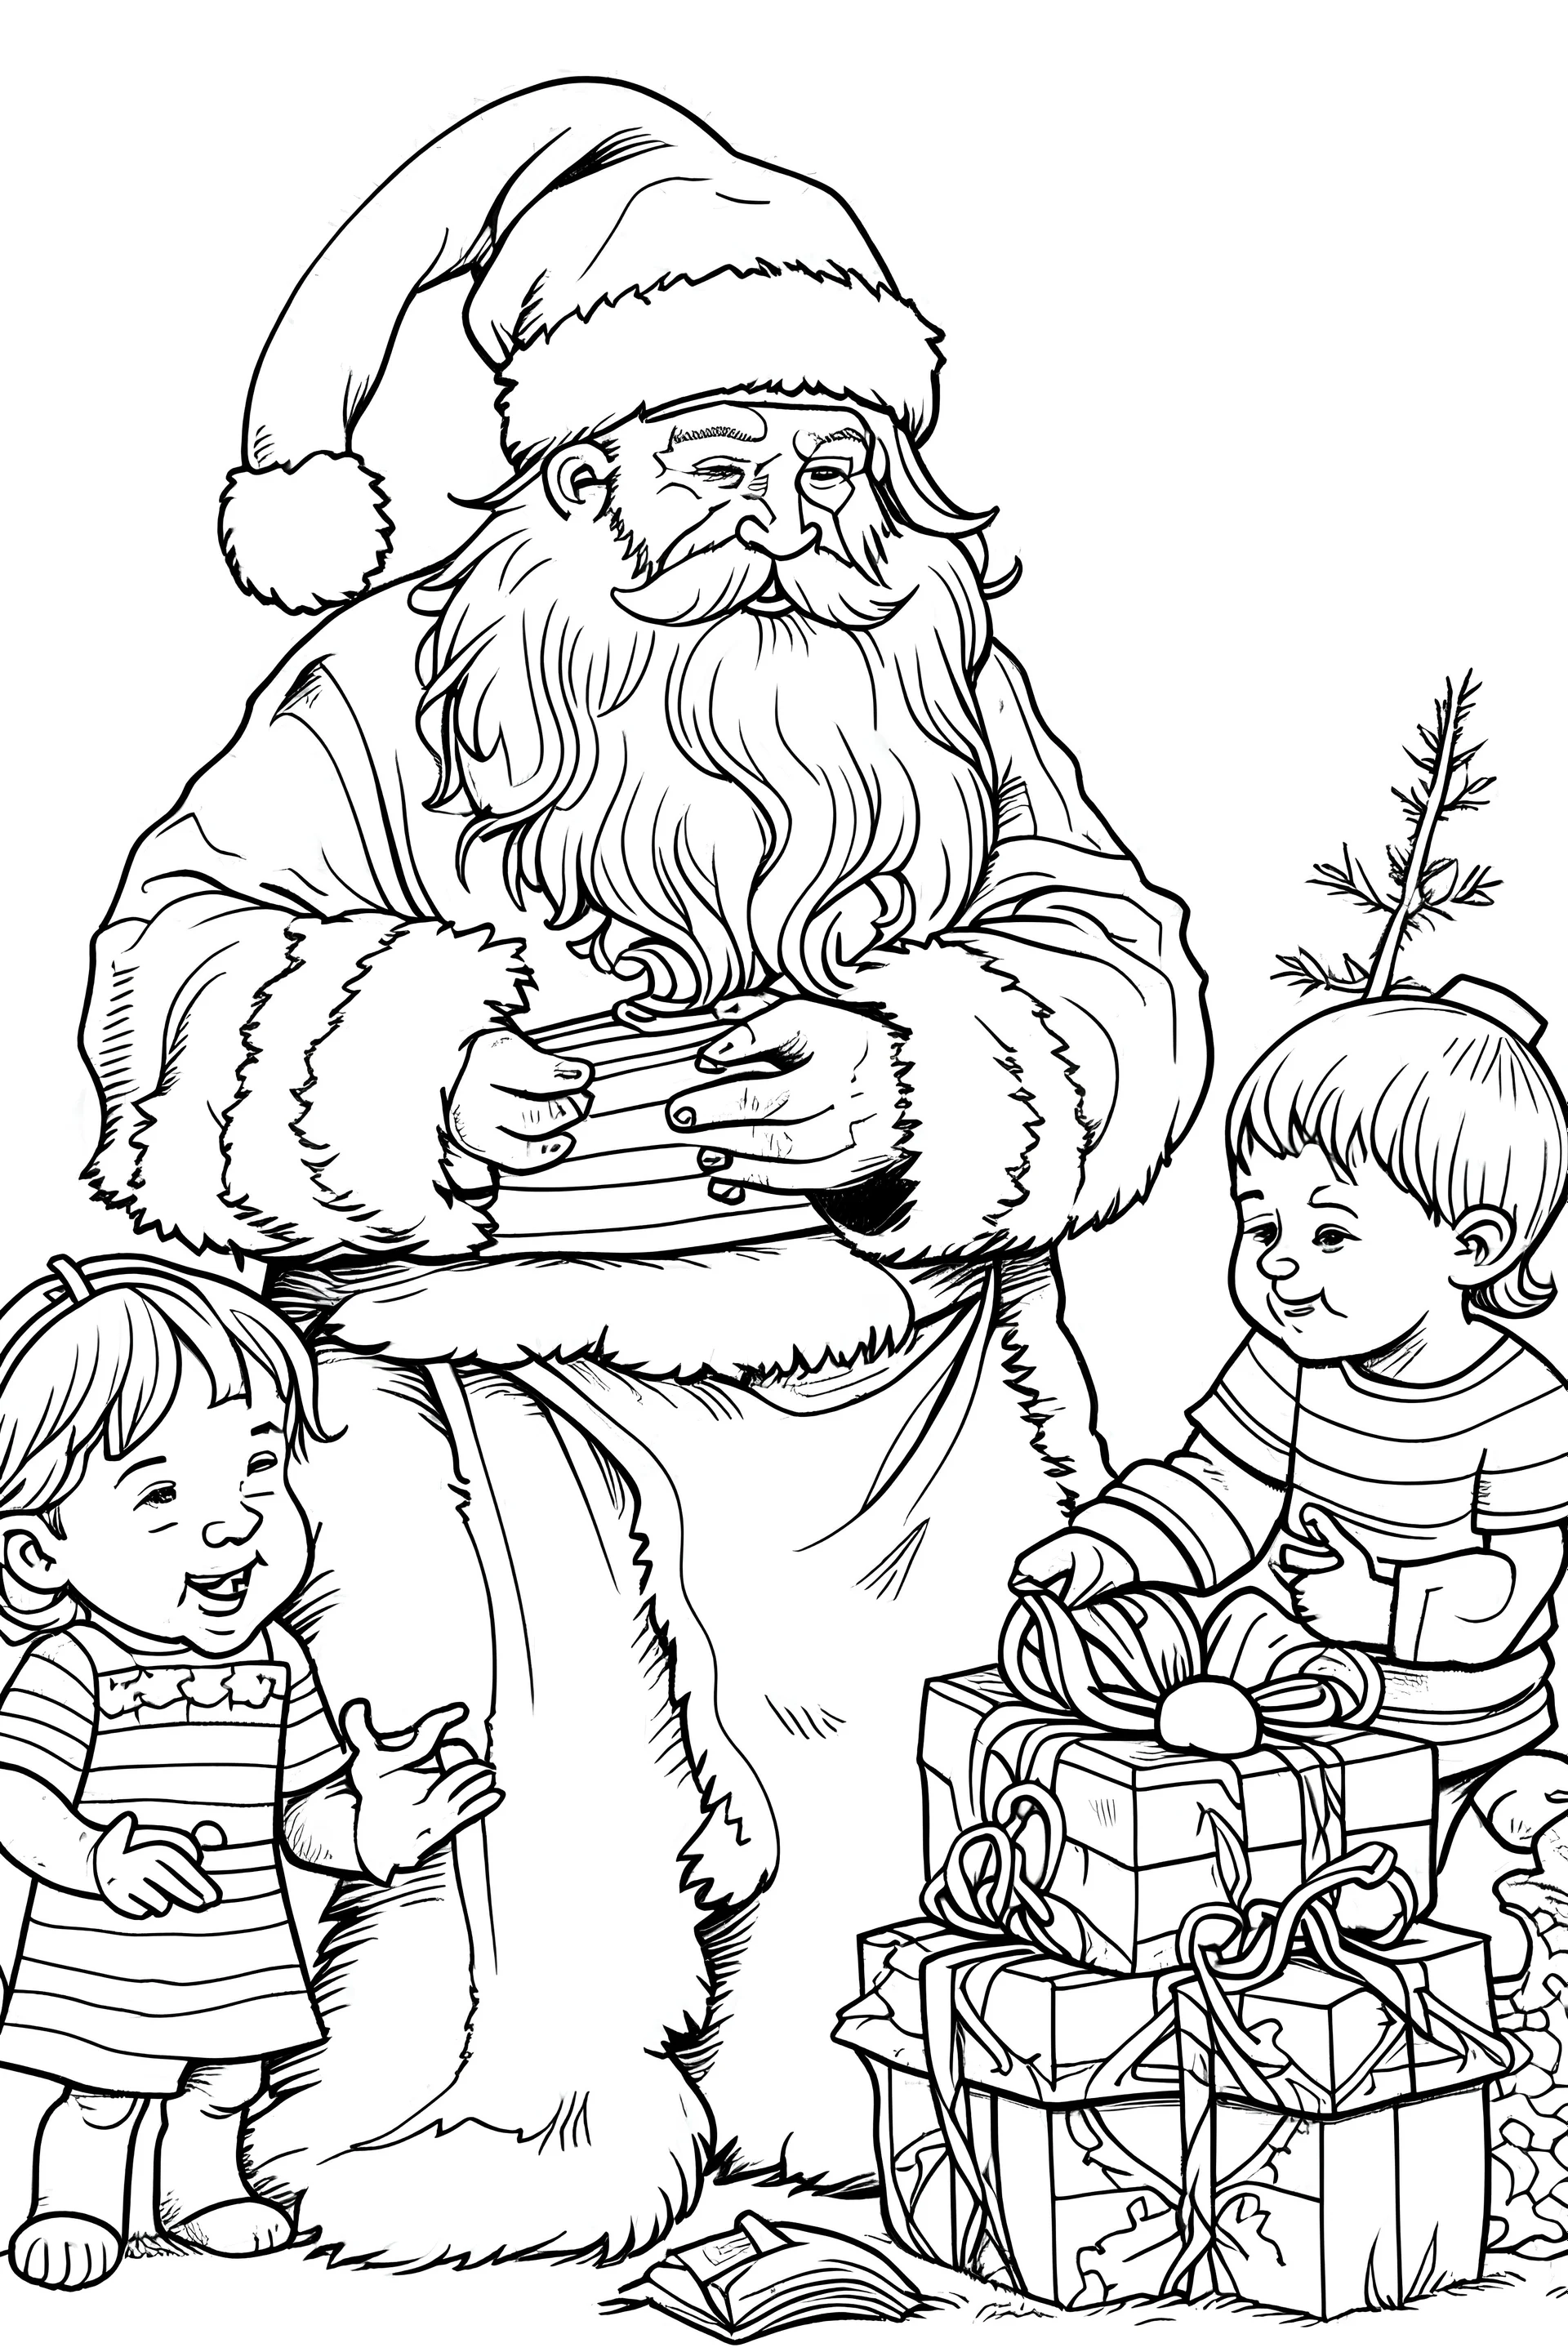 Christmas coloring page with Santa Claus giving children special gifts, a bold ink line sketch drawing illustration.